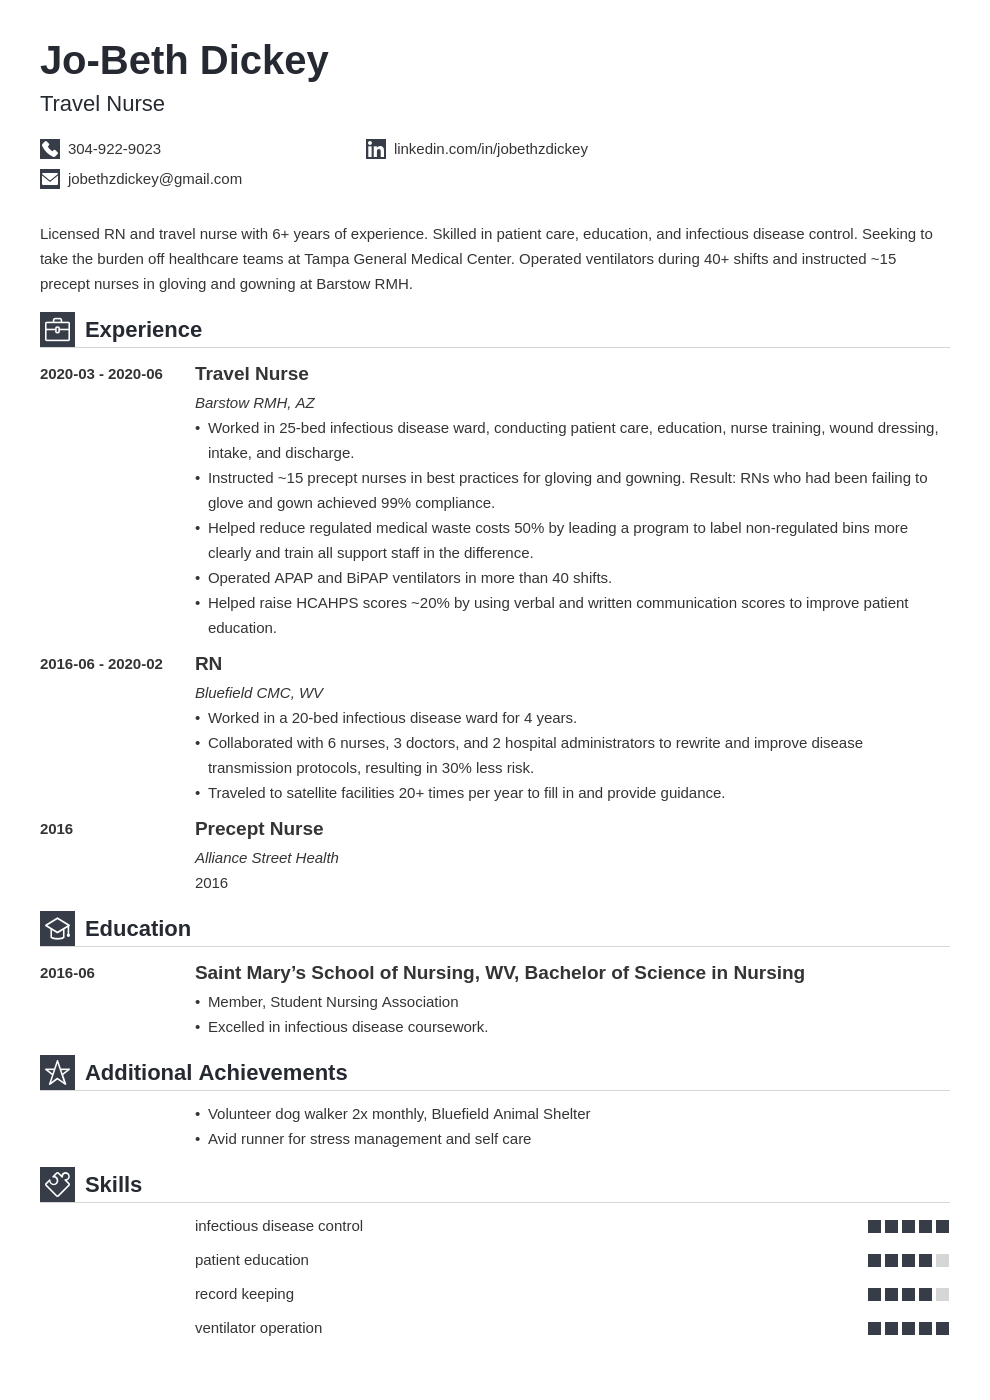 Remarkable Website - resume Will Help You Get There